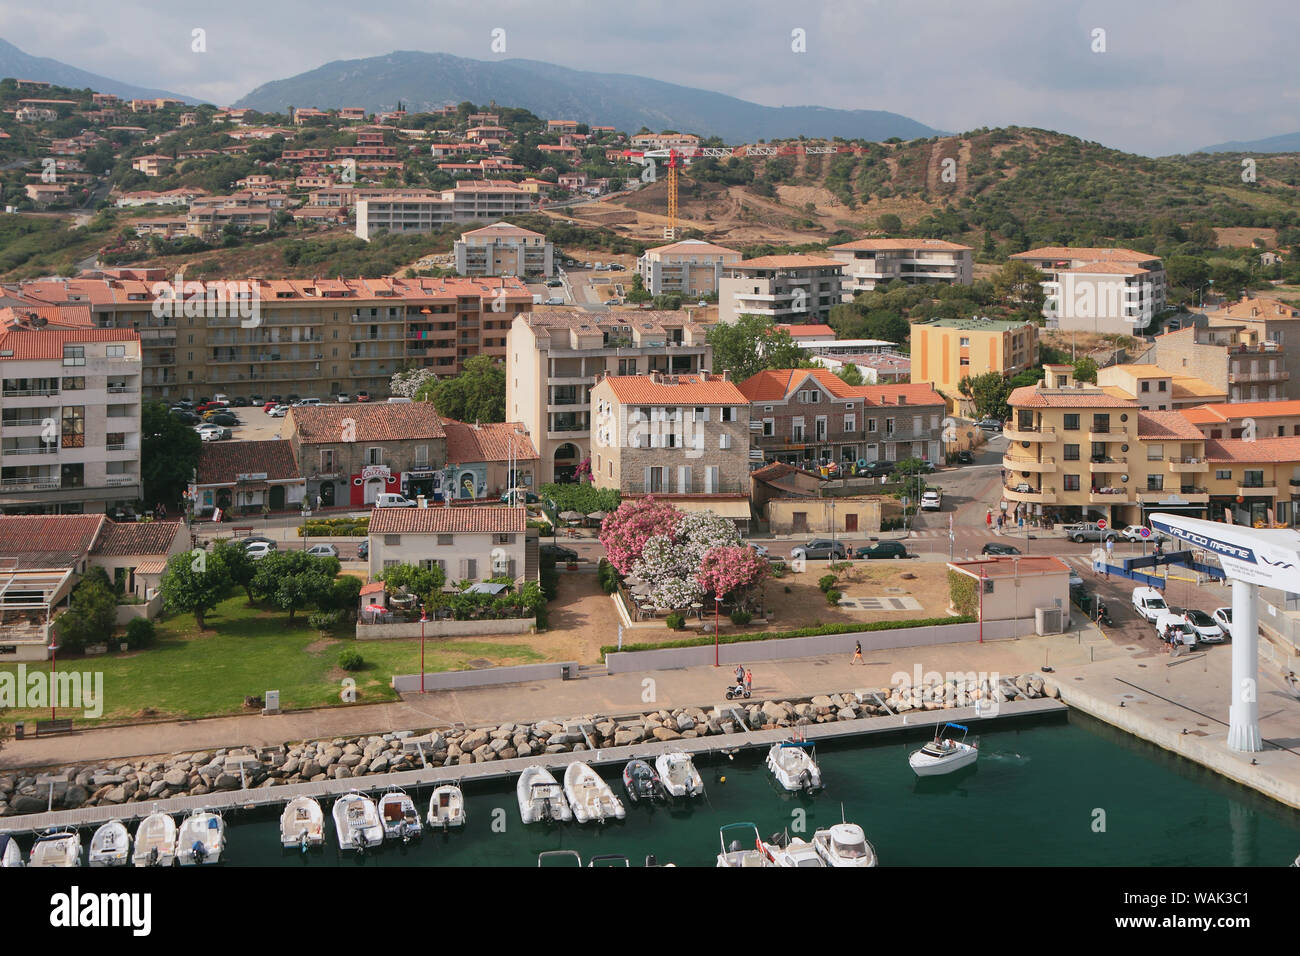 Propriano, Corsica, France - Jul 07, 2019: Yacht parking and town Stock Photo